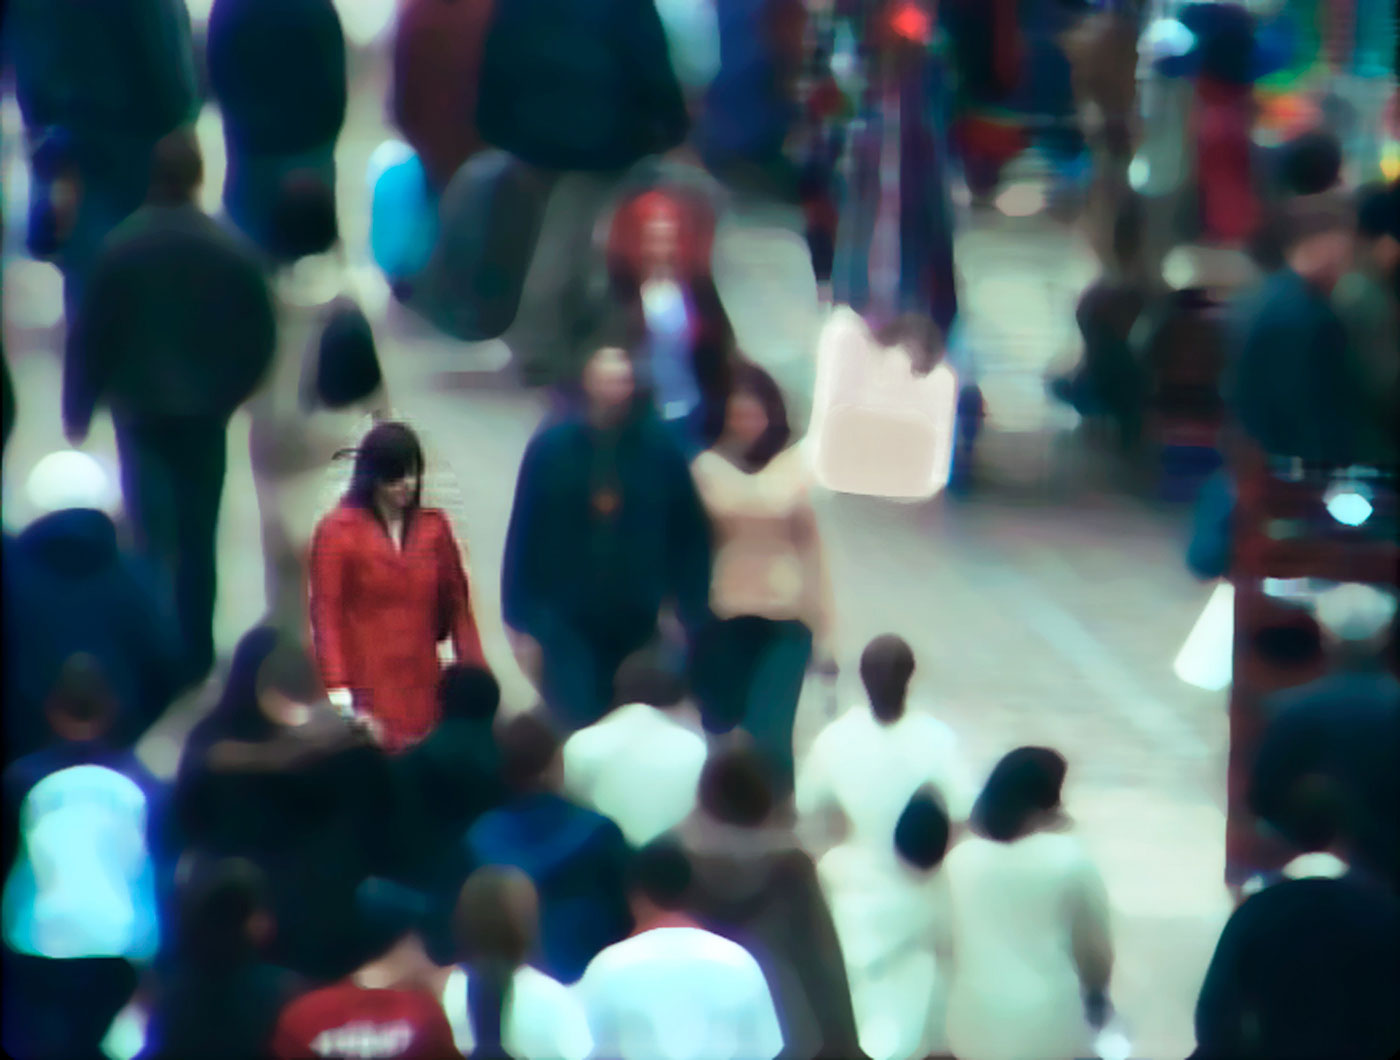 A dark-haired woman in a red coat stands in a crowded street. Only her image is crisp, the other figures have been blurred.